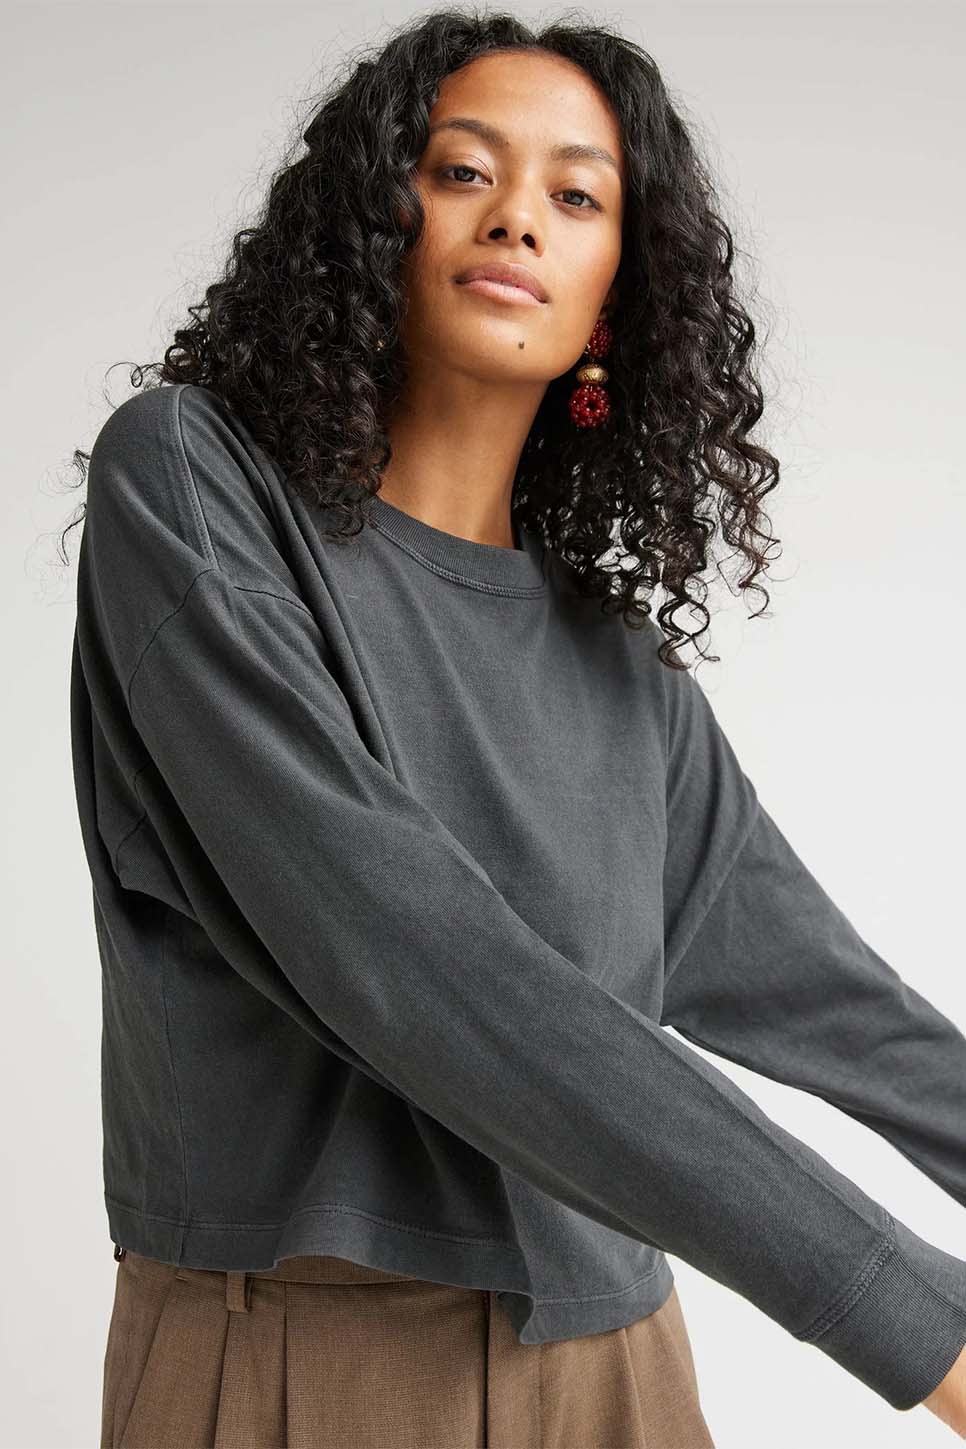 Richer Poorer - Relaxed Crop LS Tee - Stretch Limo - Front